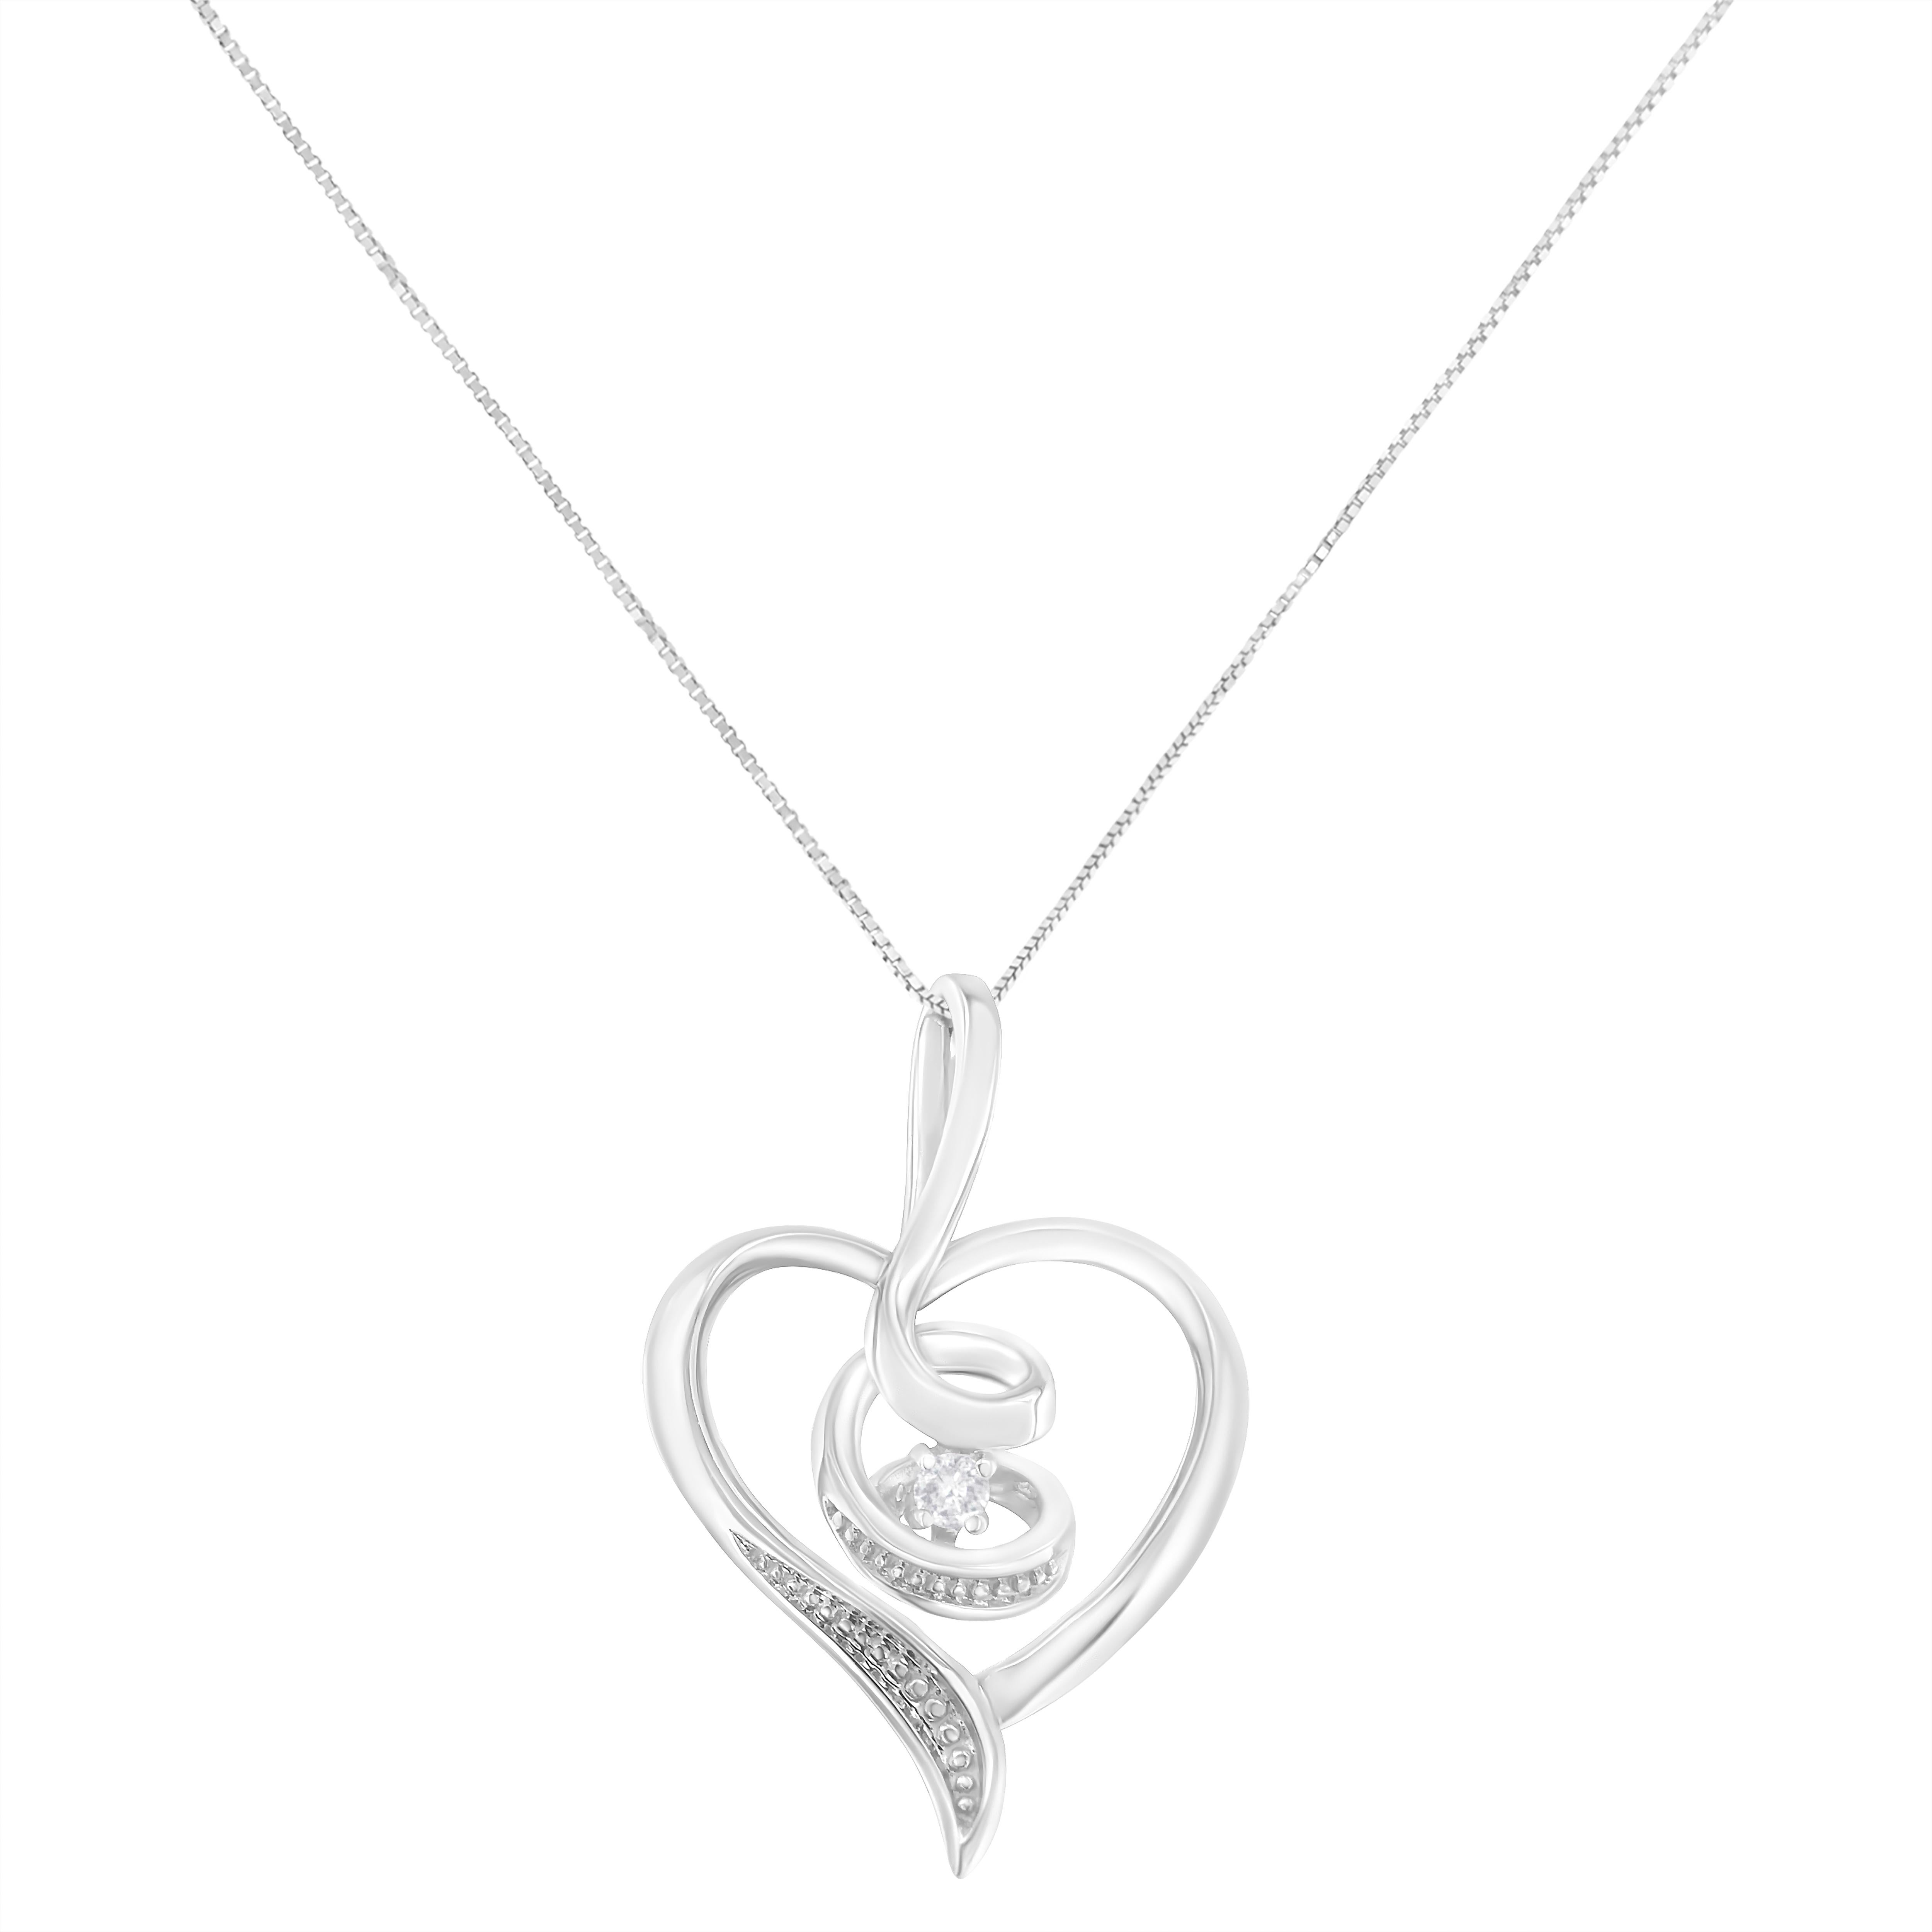 Symbolizing a love that never ends, this impeccably designed 10k white gold heart pendant swirls at the center and sparkles with a scattering of diamonds. This pendant dangles from an 18'' long box chain with a spring ring clasp. It's a classic